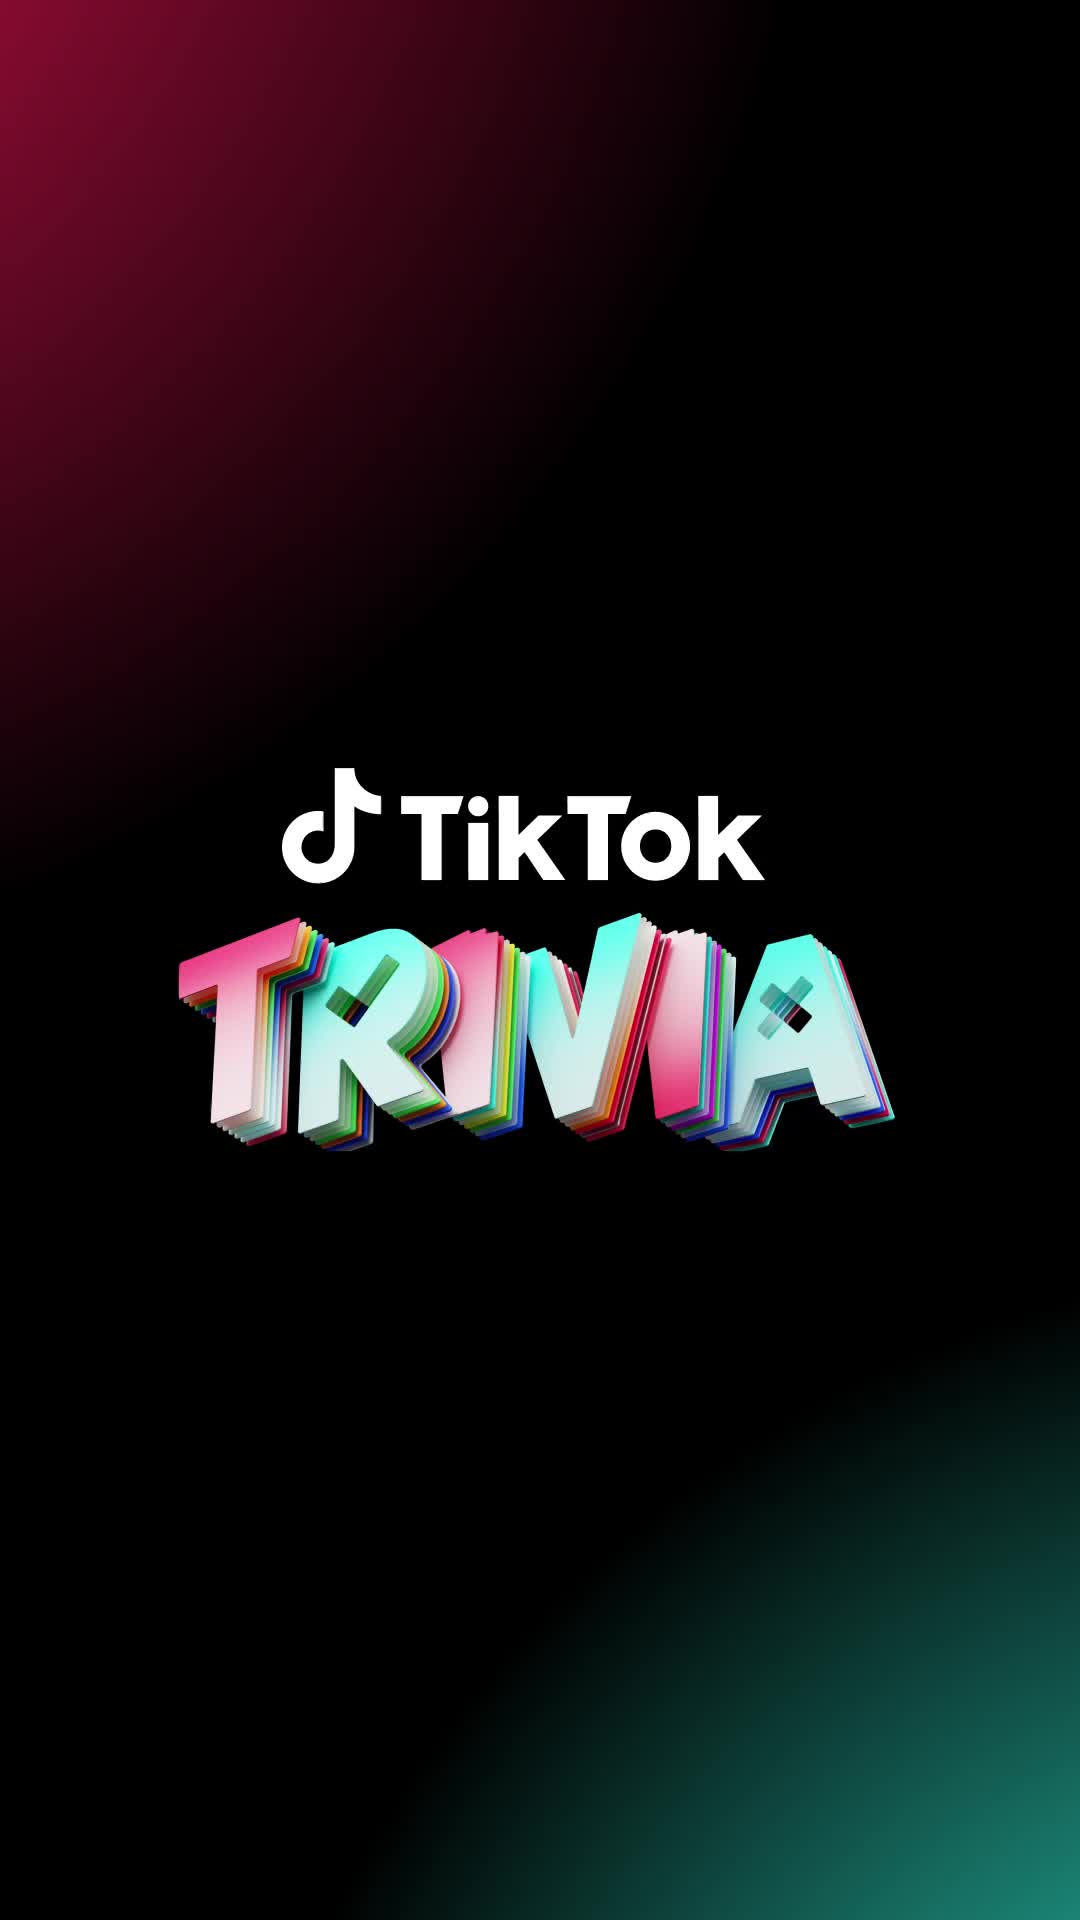 Want to get your share of a $500,000 prize pool? @jameshenry will put your knowledge to the test for all things TikTok, pop culture, & entertainment in a series of 8 LIVE shows from Feb. 22-26! Make it to the end of each game to win! #TikTokTrivia #RealBrainsRealRewards